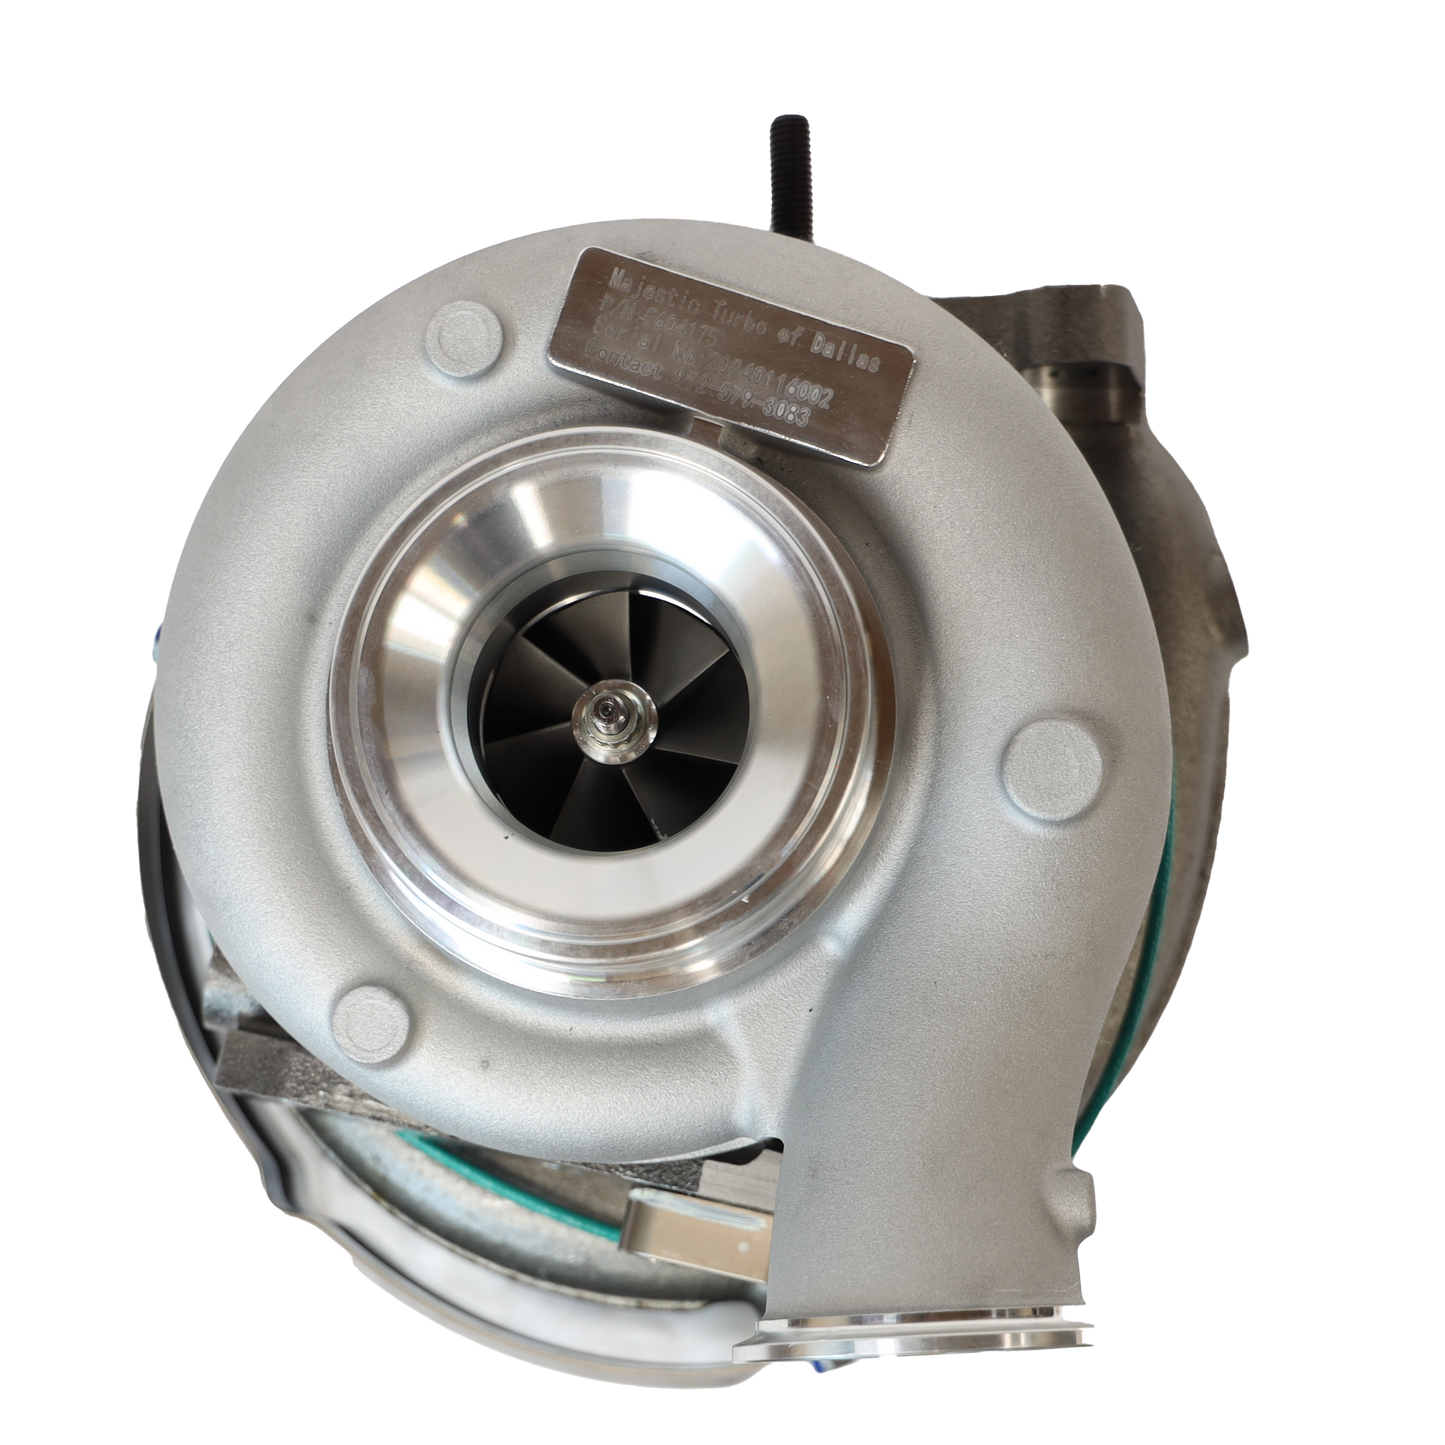 5604175 Cummins 6.7L ISB HE300VG Turbocharger with Actuator